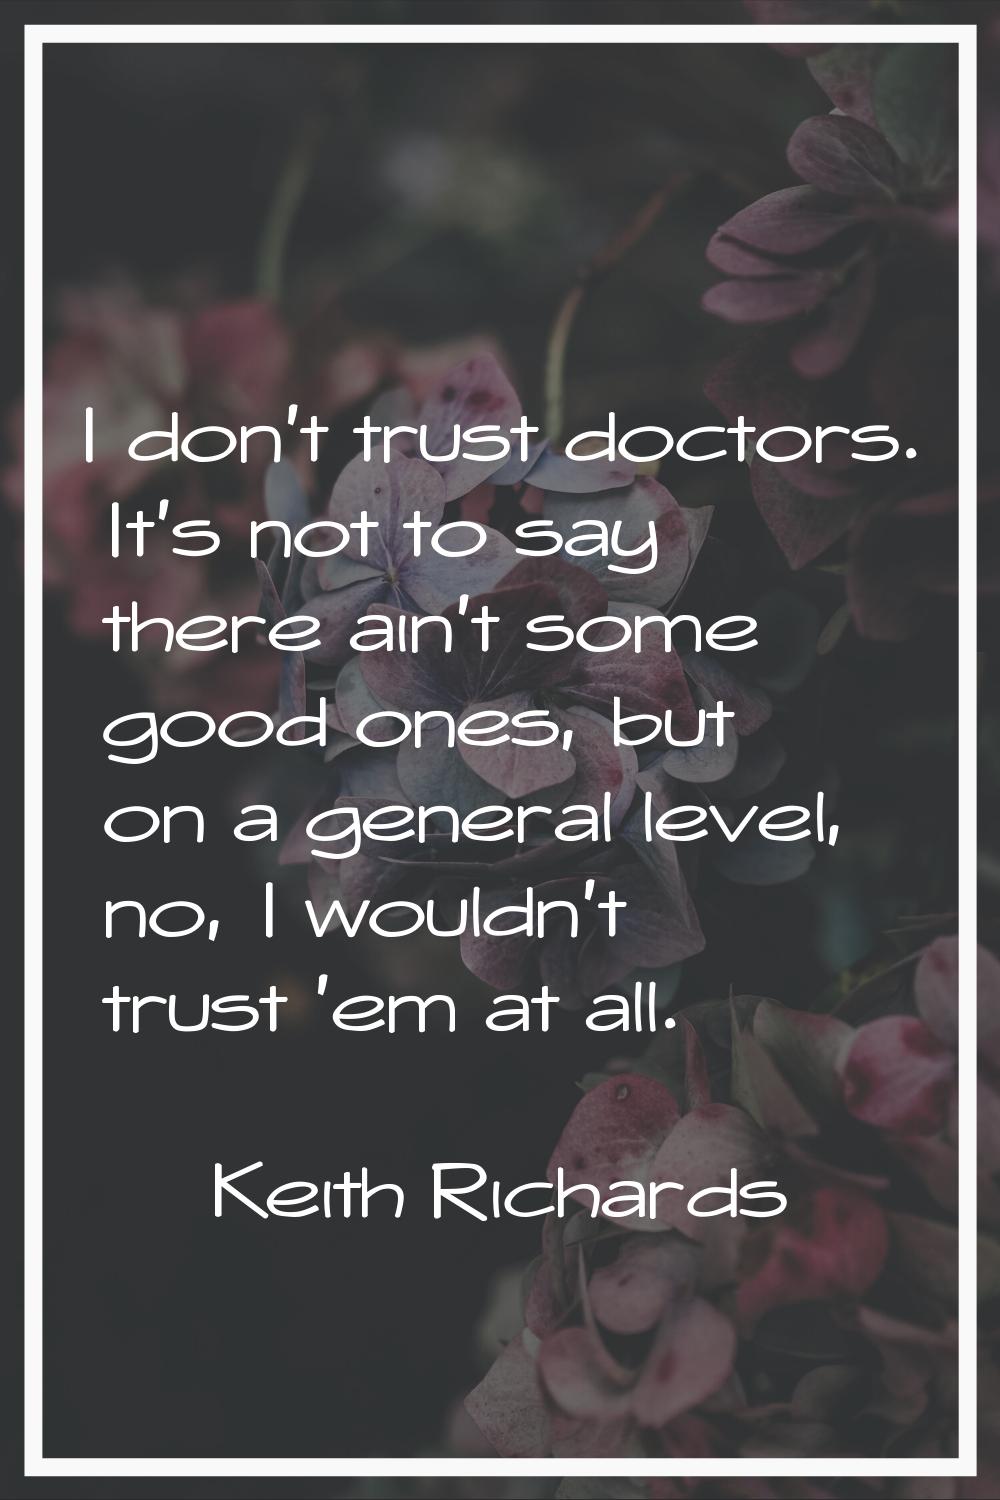 I don't trust doctors. It's not to say there ain't some good ones, but on a general level, no, I wo